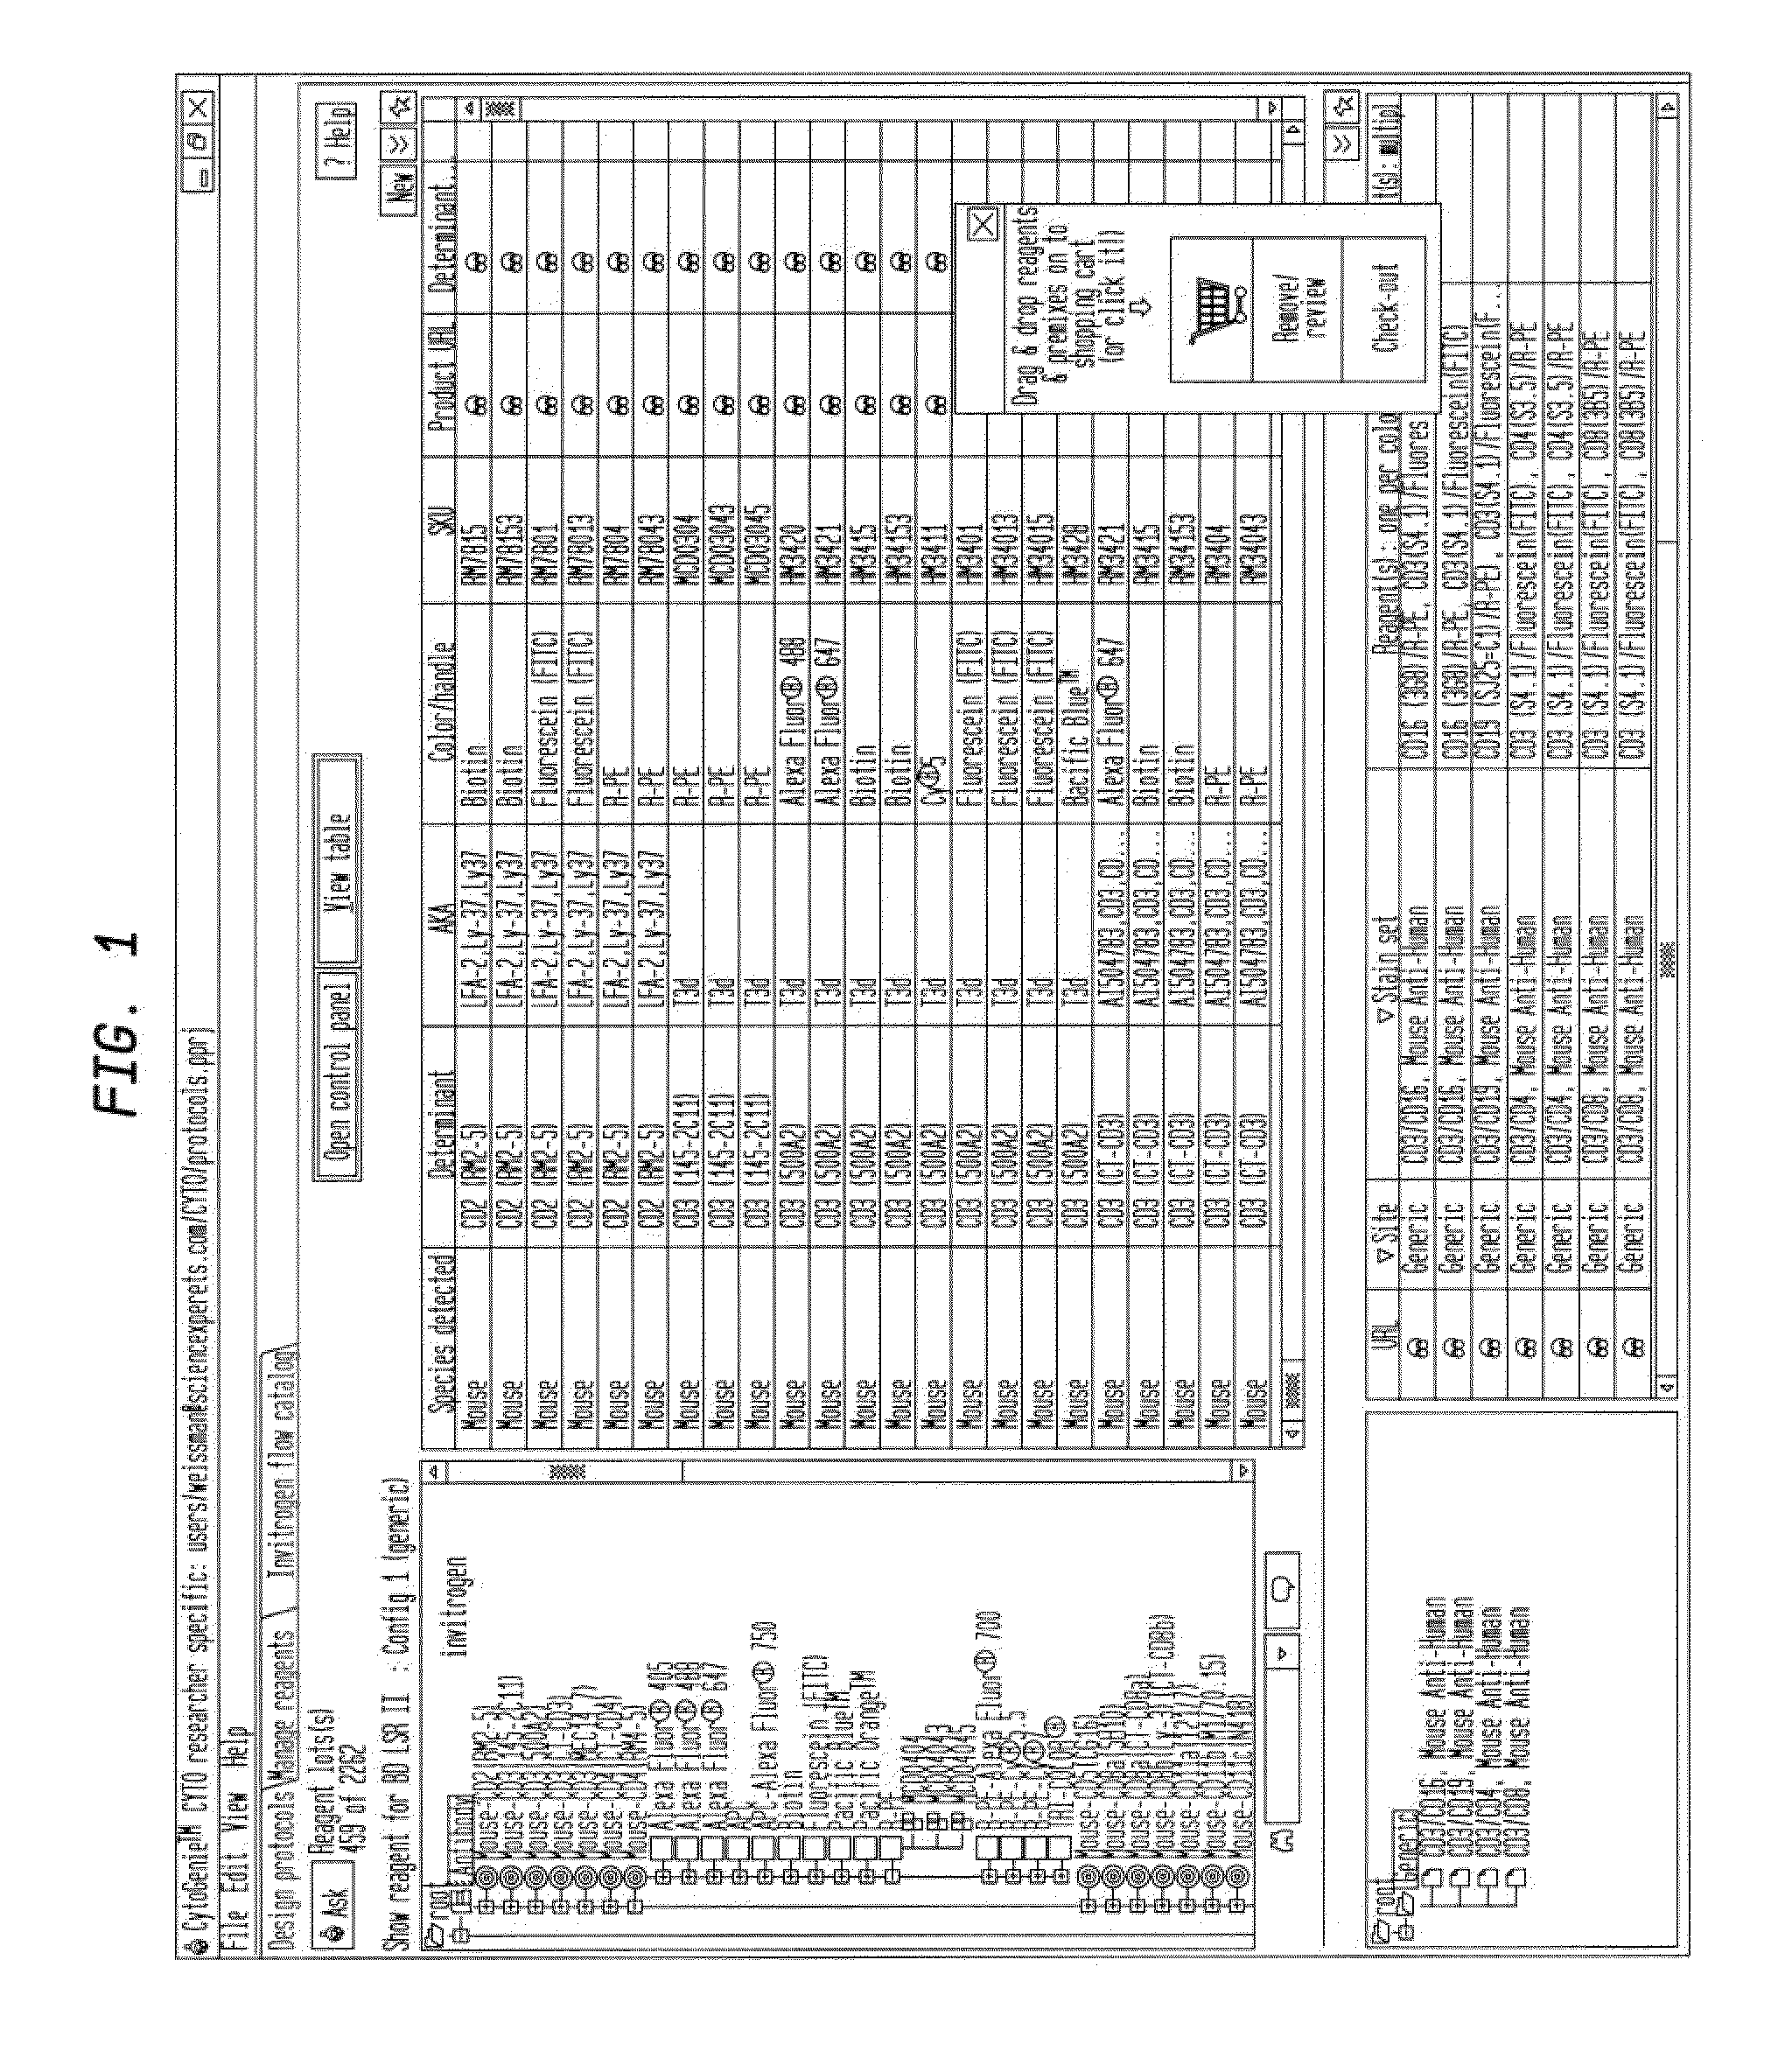 System and method for selecting a multiparameter reagent combination and for automated fluorescence compensation